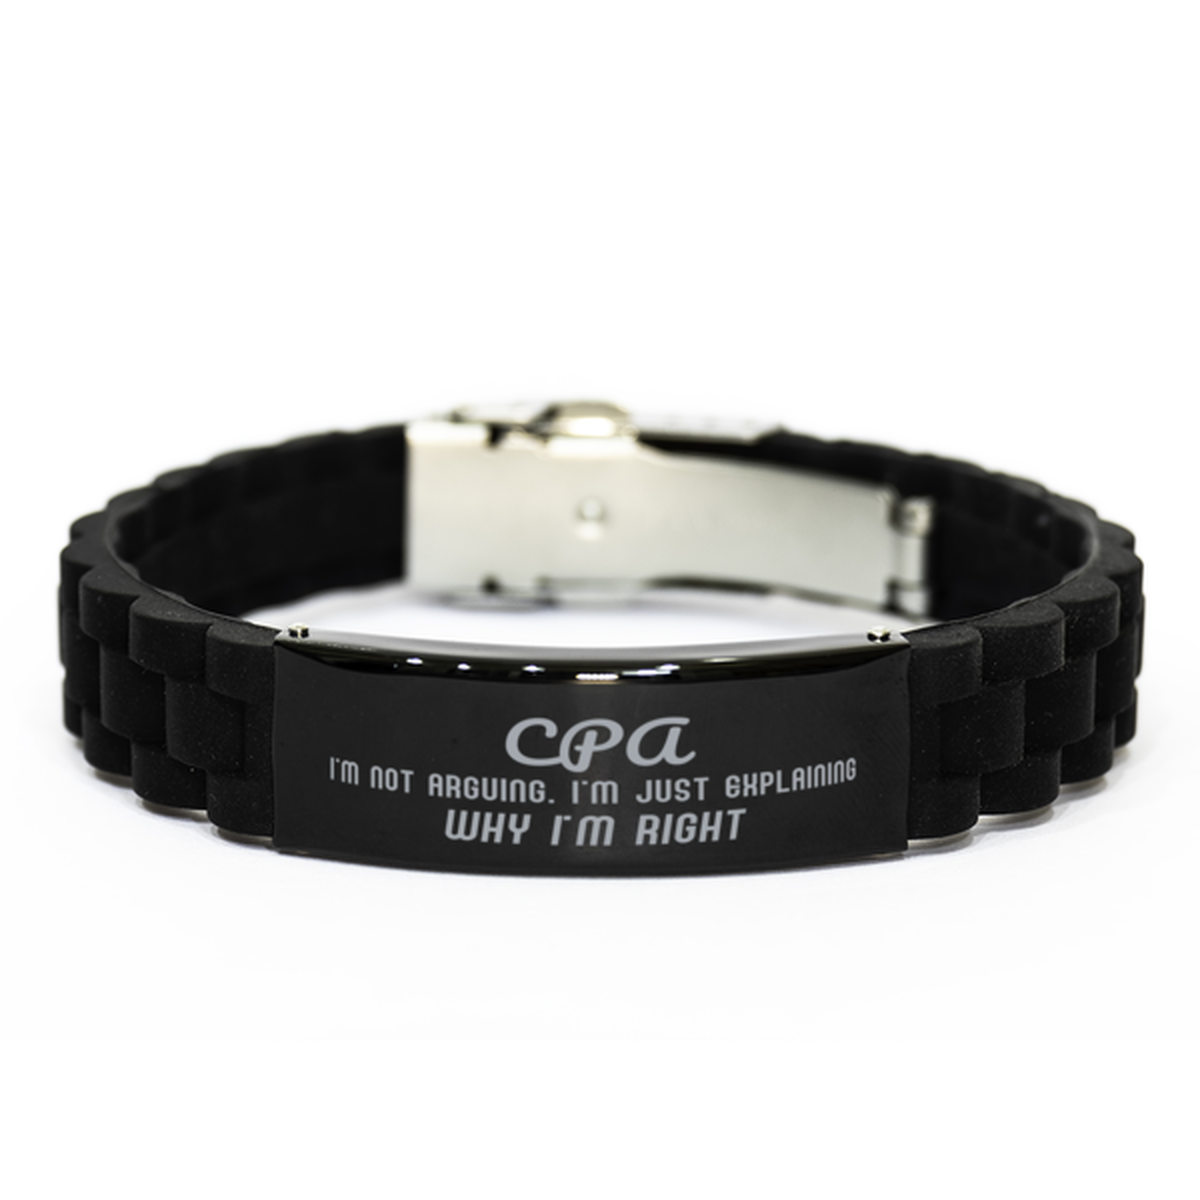 CPA I'm not Arguing. I'm Just Explaining Why I'm RIGHT Black Glidelock Clasp Bracelet, Funny Saying Quote CPA Gifts For CPA Graduation Birthday Christmas Gifts for Men Women Coworker